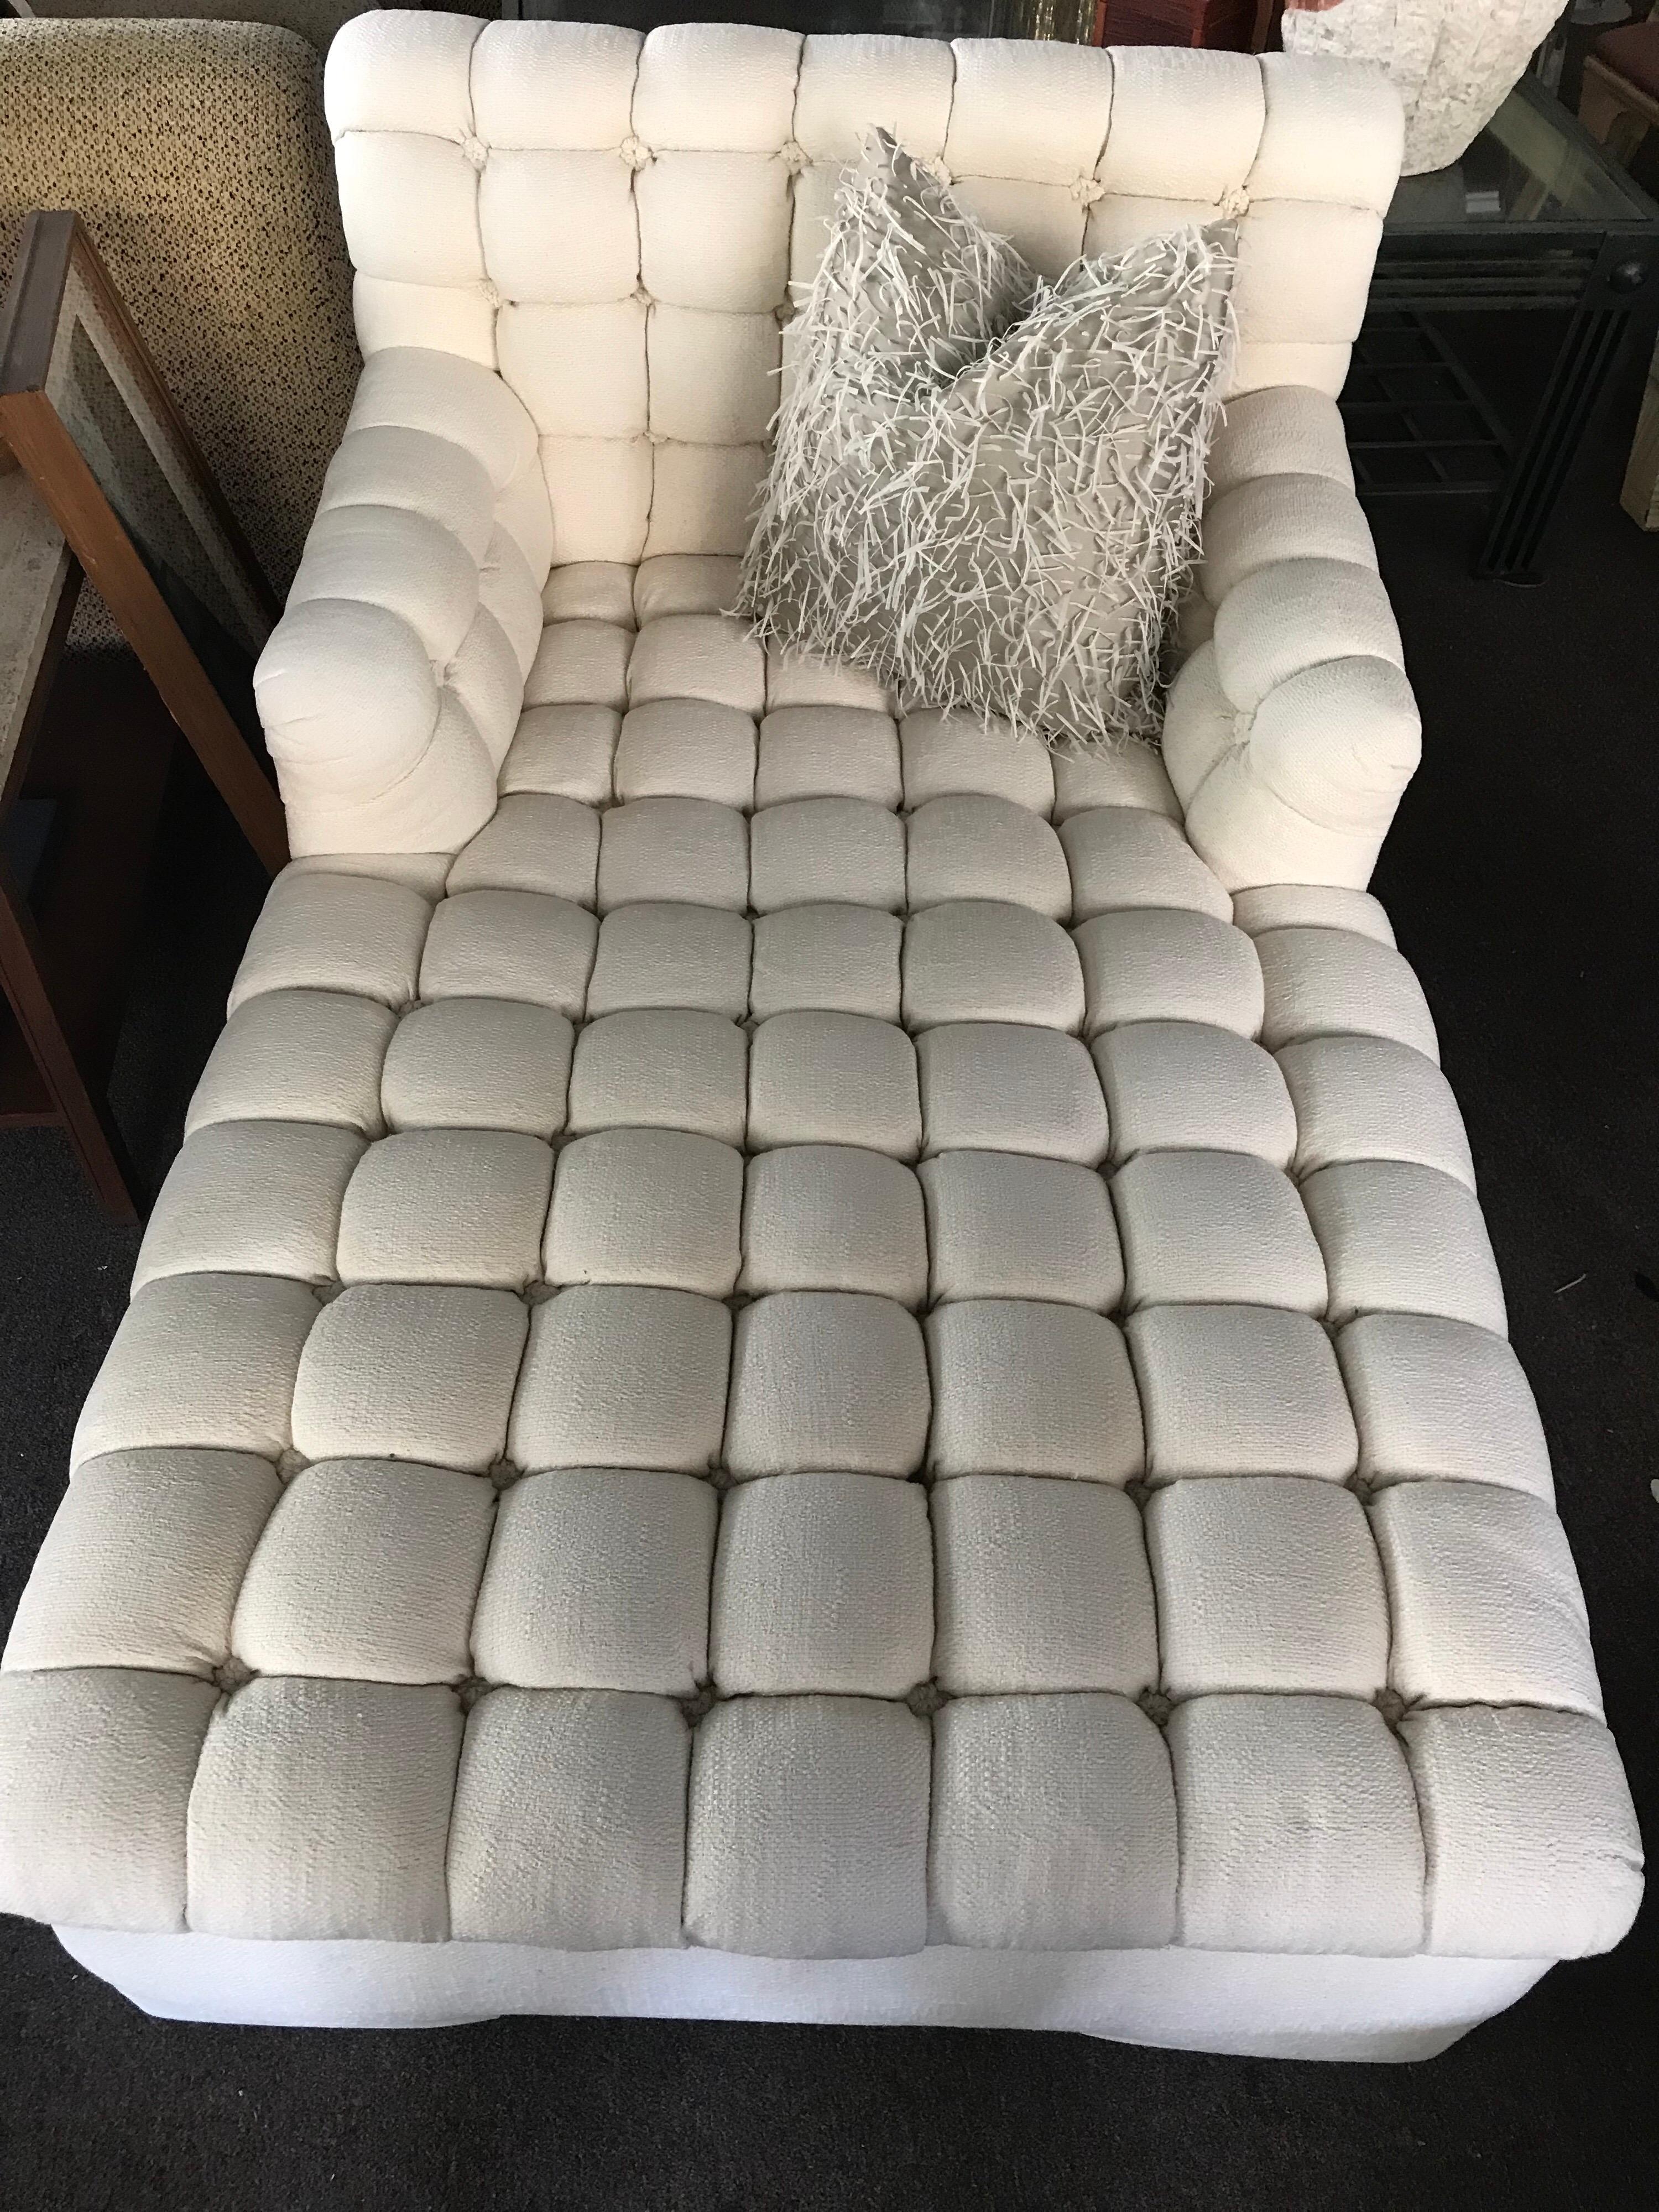 This spectacular chaise longue came from a very high end Rancho Mirage Estate designed entirely by the late, Steve Chaise. The intricate marshmallow tufted pie was made in Los Angeles by A. Rudin.